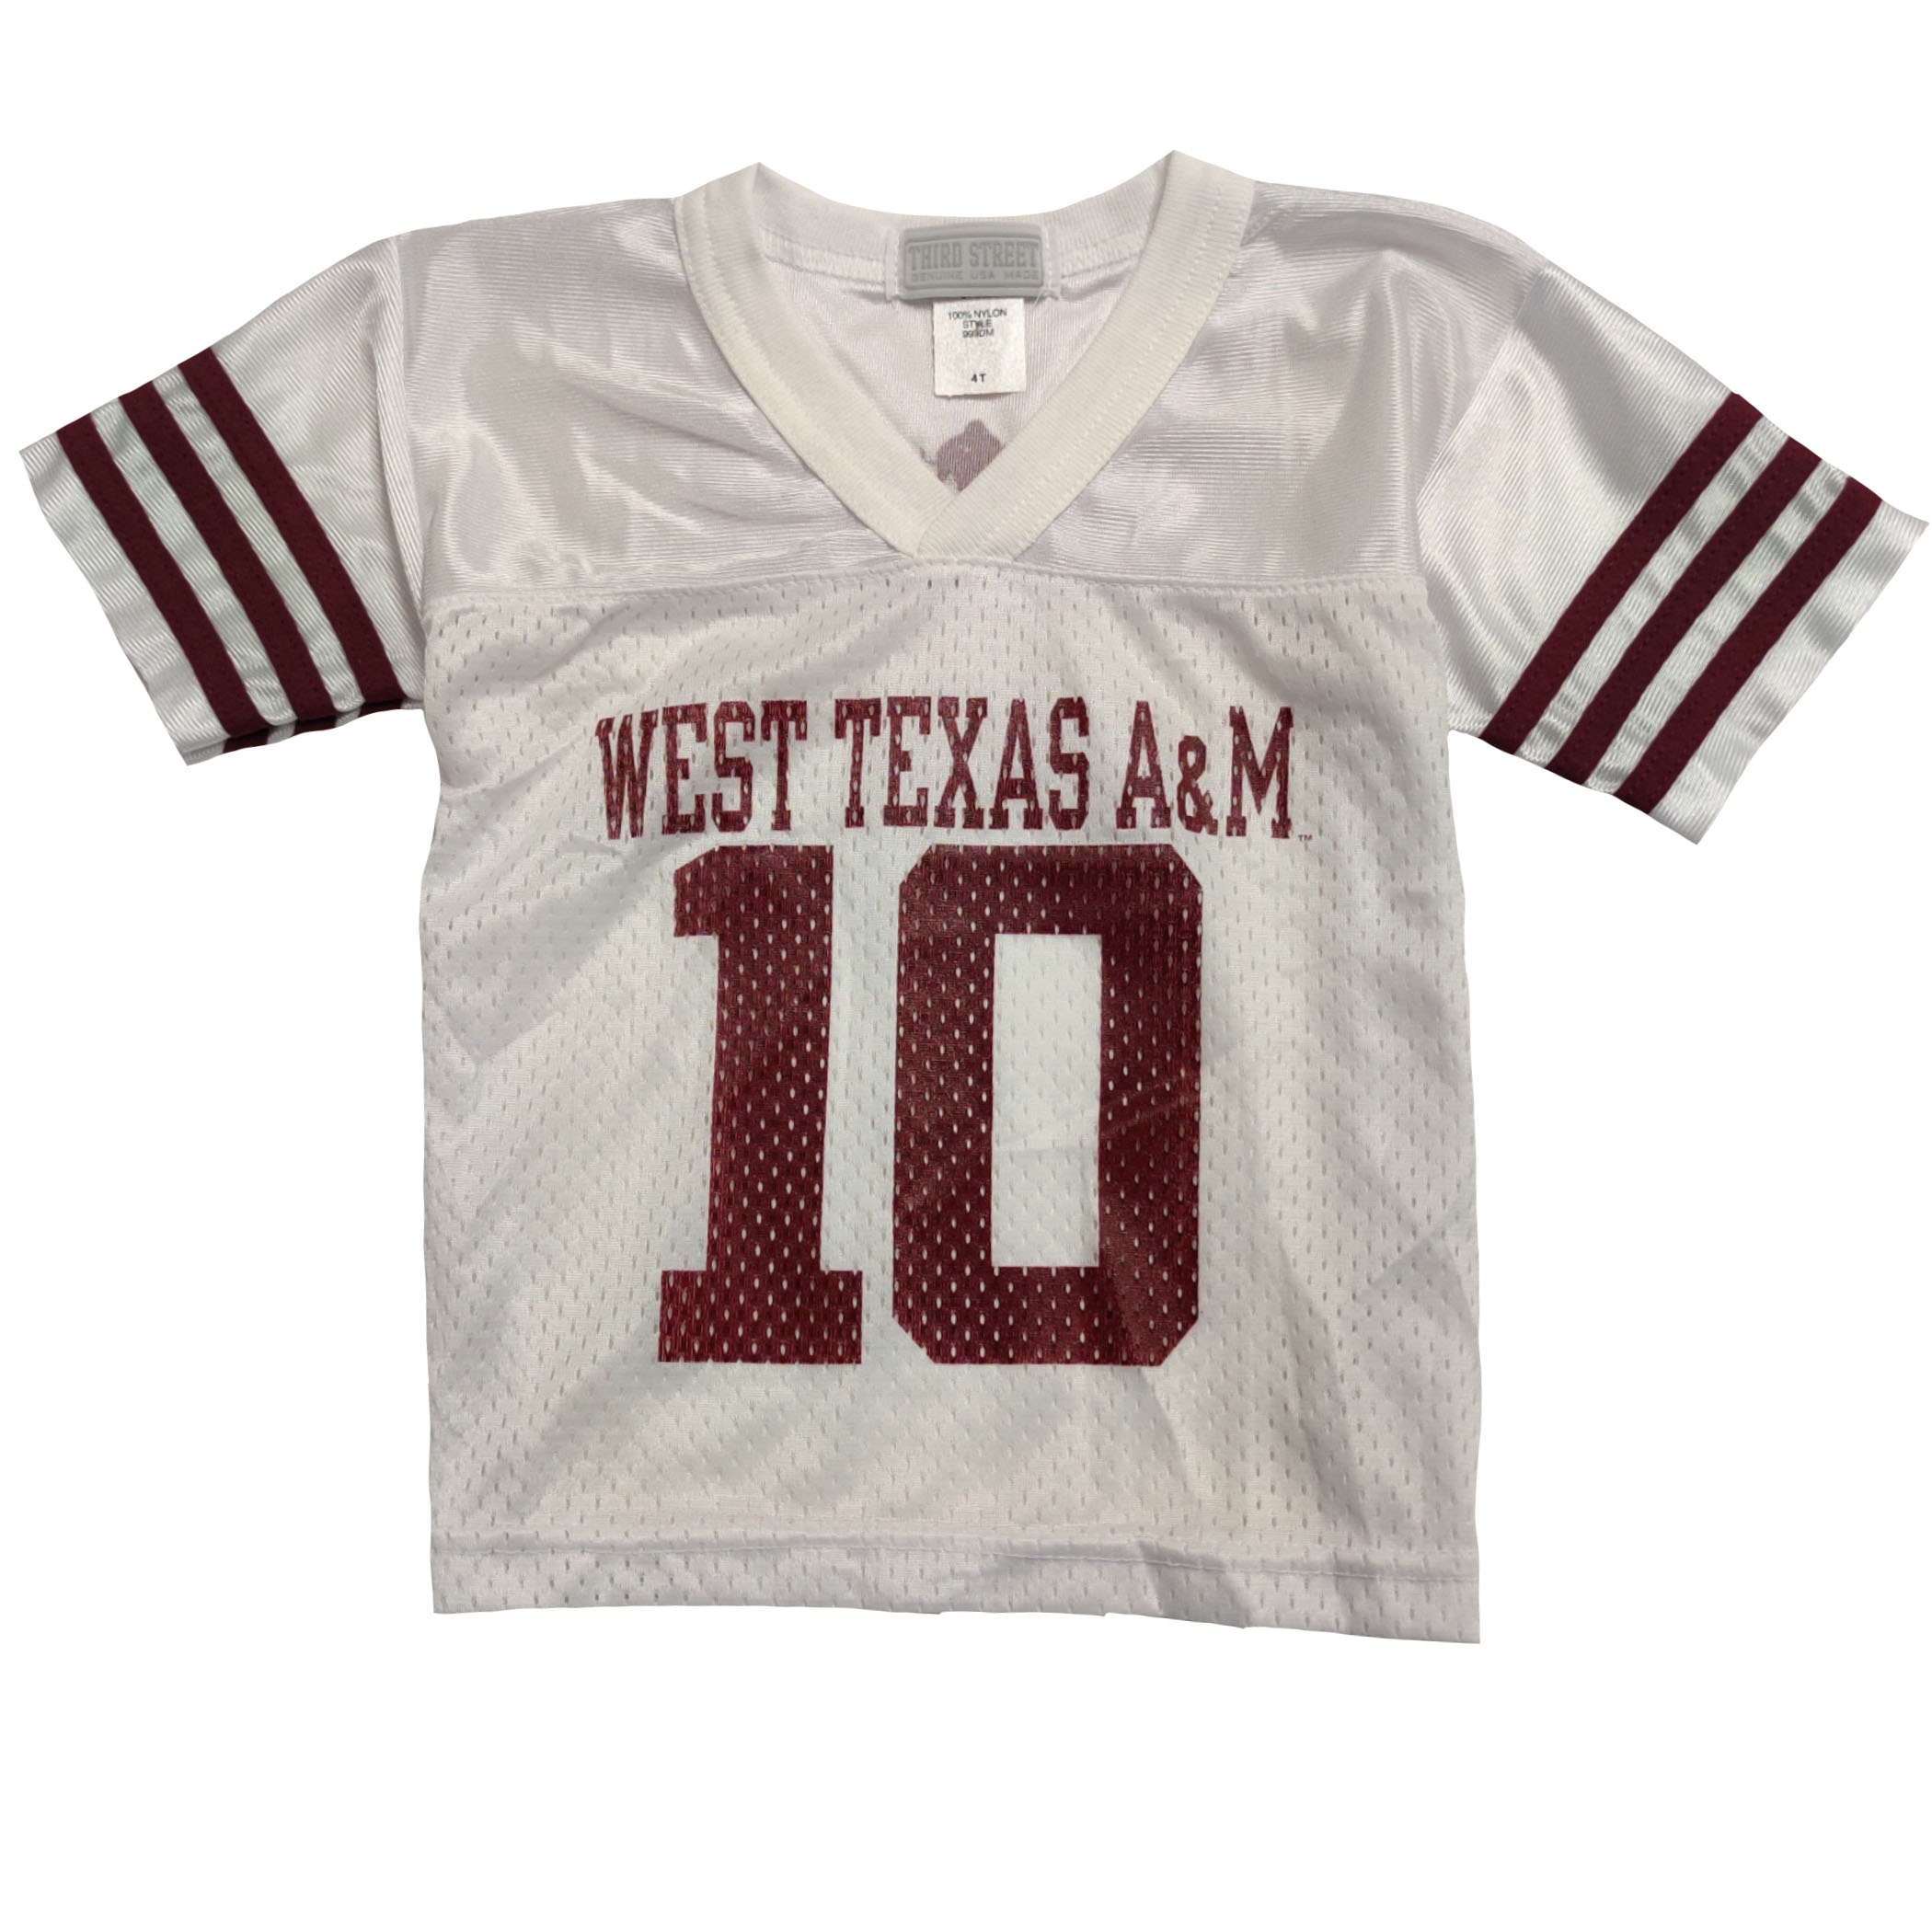 Cover Image For Football Jersey - Toddler